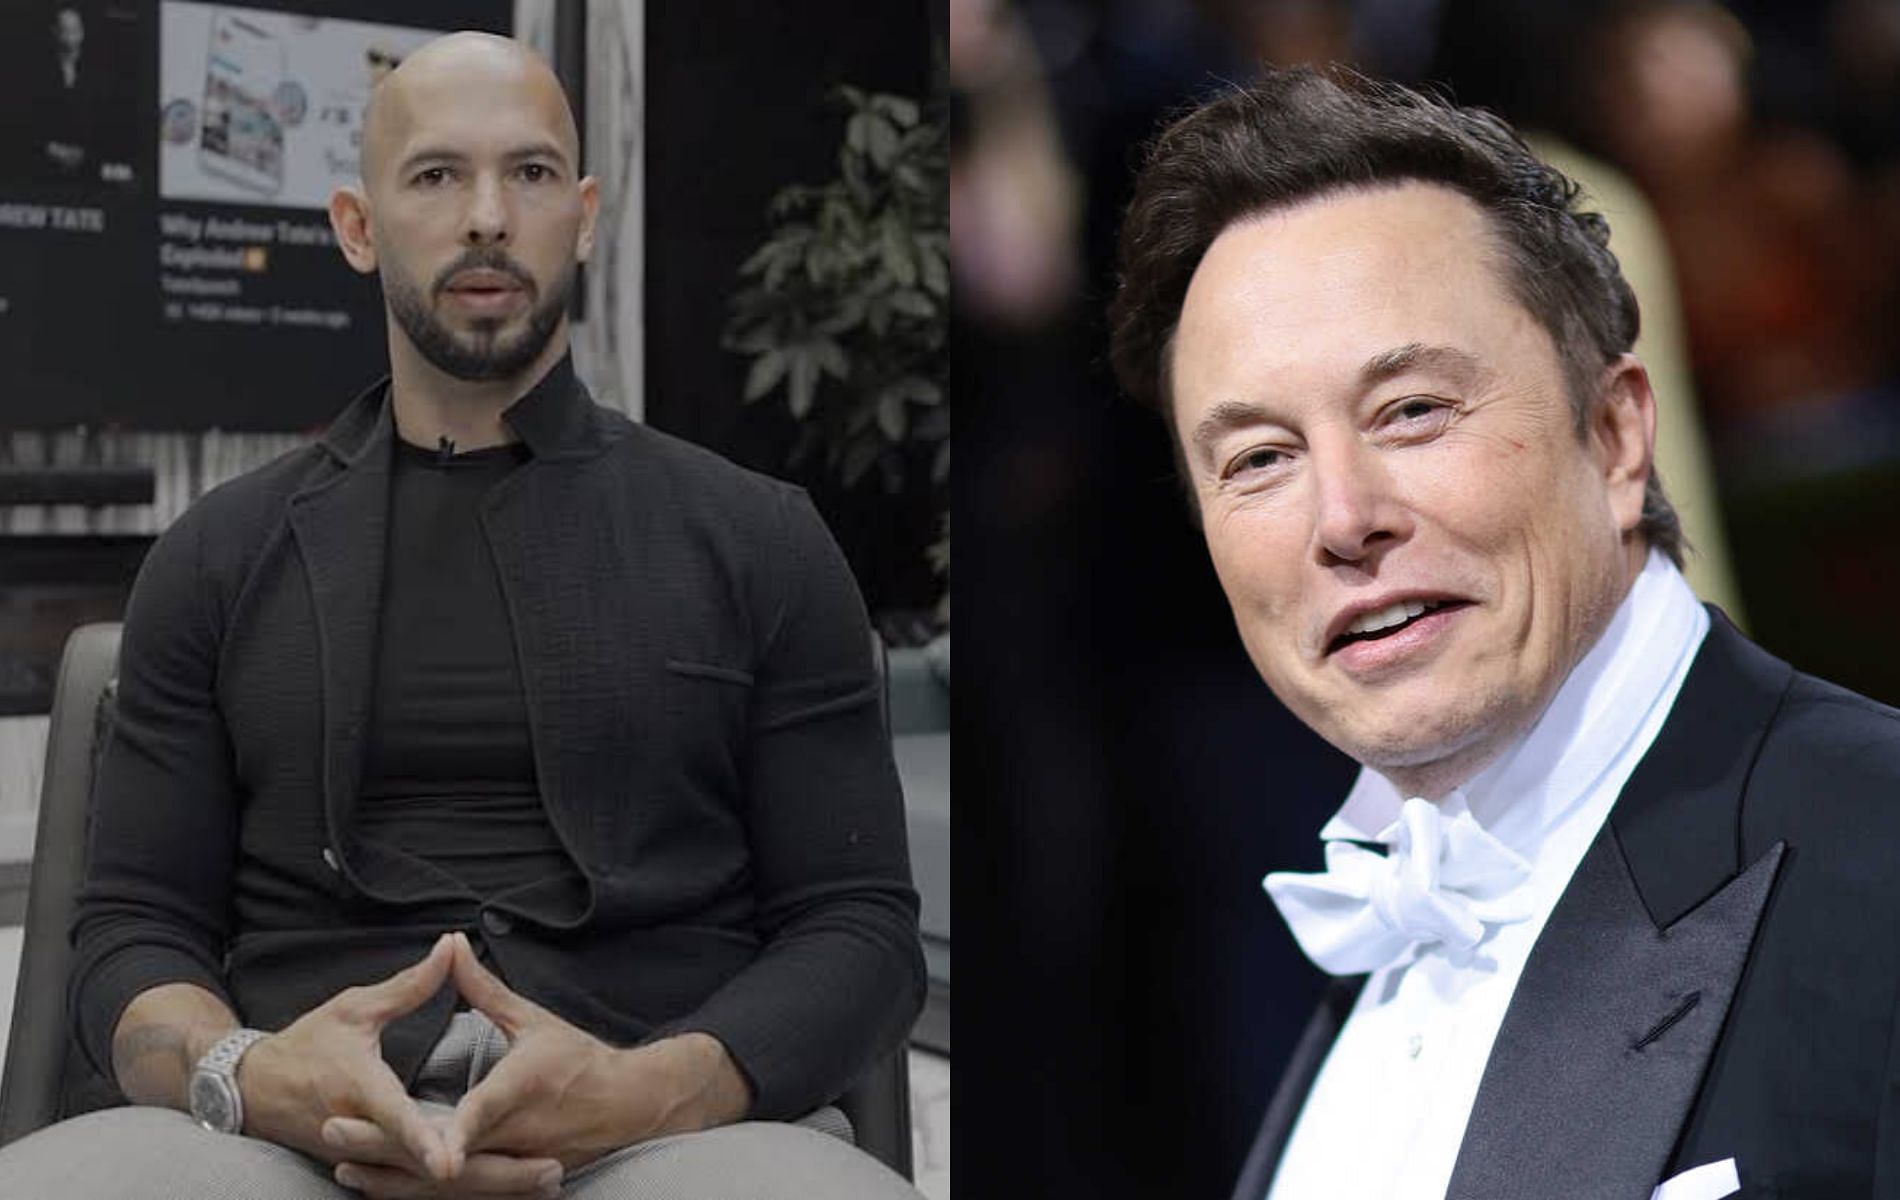 Andrew Tate (left) and Elon Musk (right)